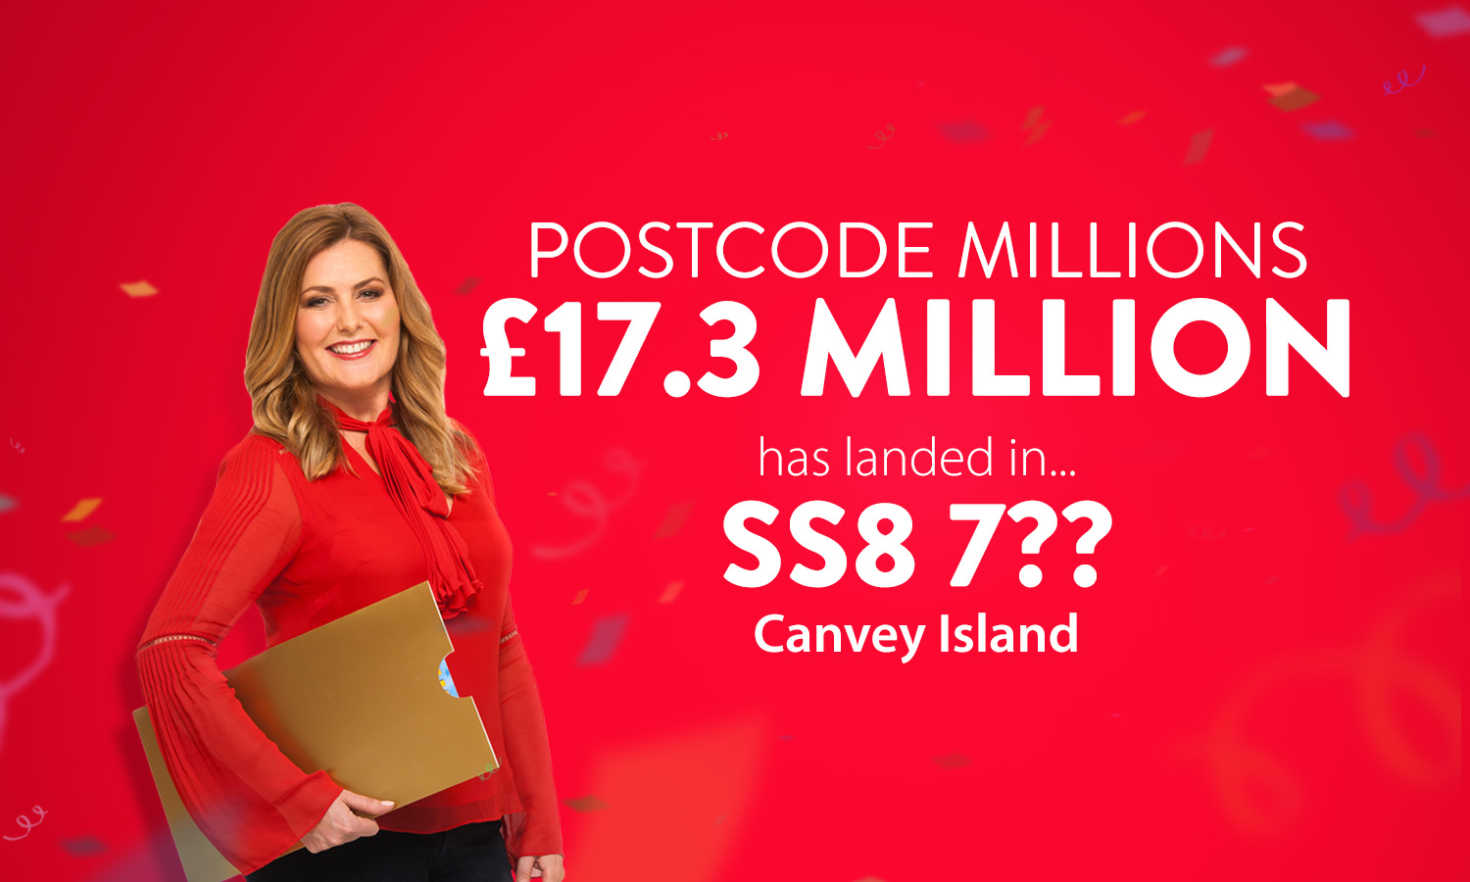 Our latest Postcode Millions has landed in Canvey Island, and players will share a whopping £17.3 Million!